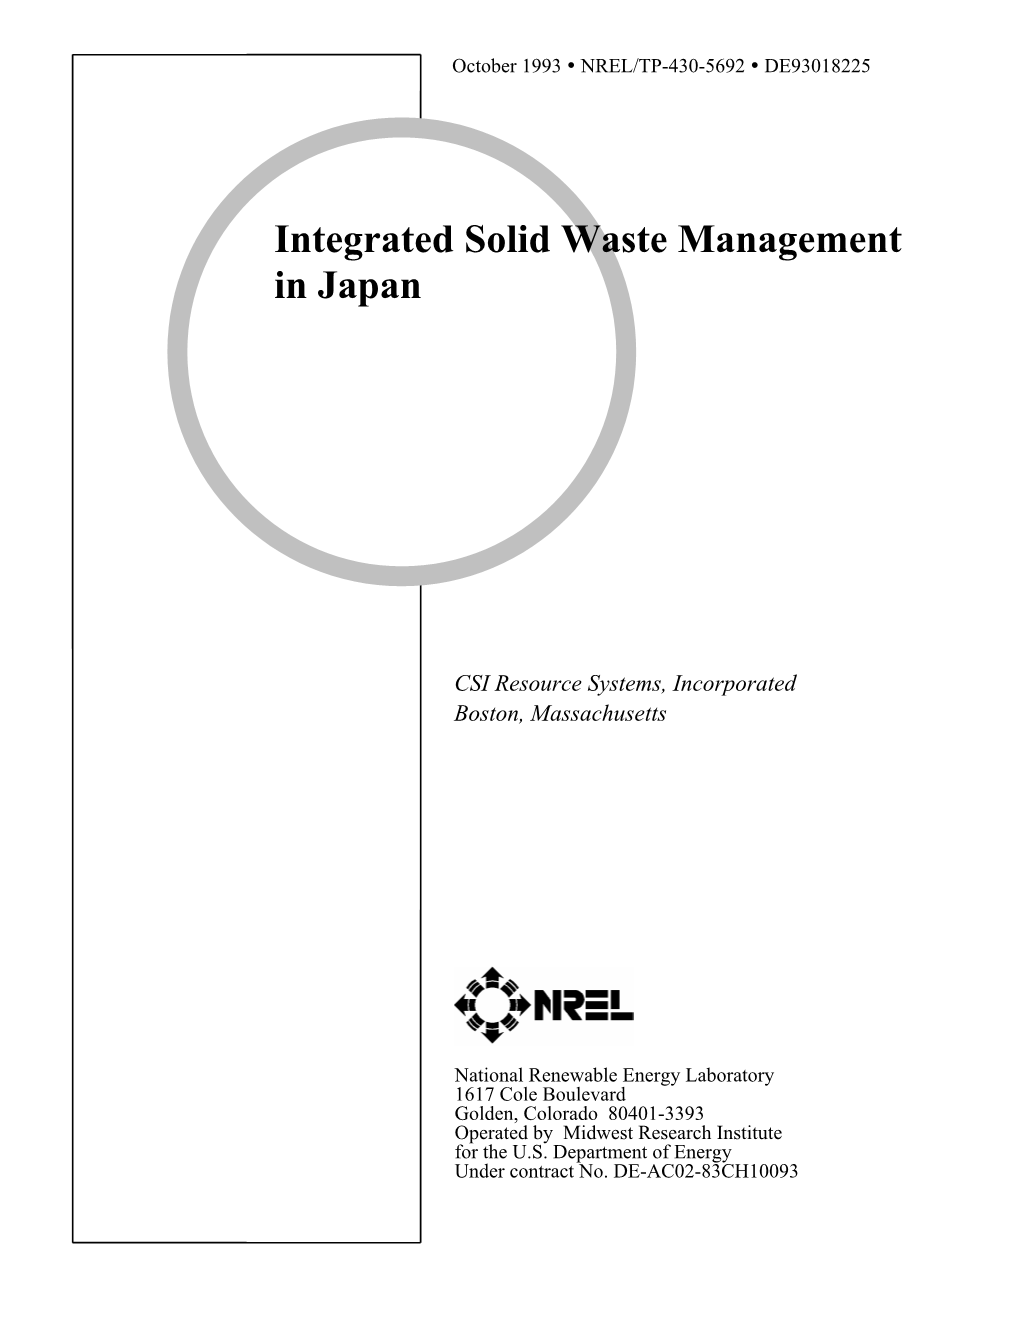 Integrated Solid Waste Management in Japan